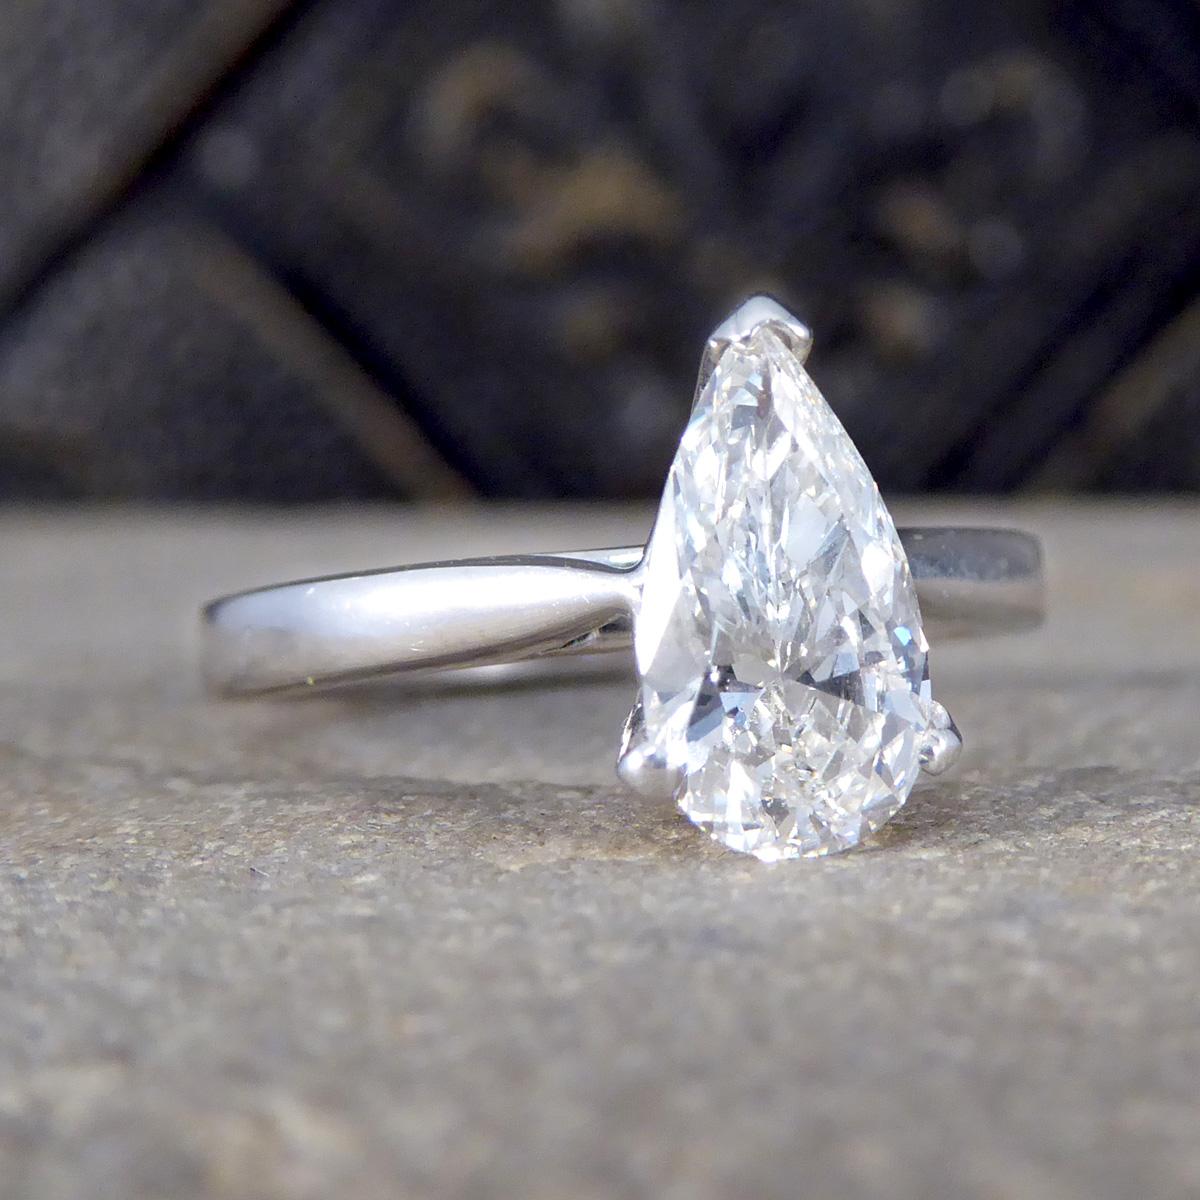 A beautiful bright Pear cut Diamond solitaire ring. Featuring and clear and radiant Pear Cut Diamond weighing approximately 1.26ct in a three claw setting. The Diamond itself has a higher grade of colour assessed as G/H in colour and SI1 in clarity,